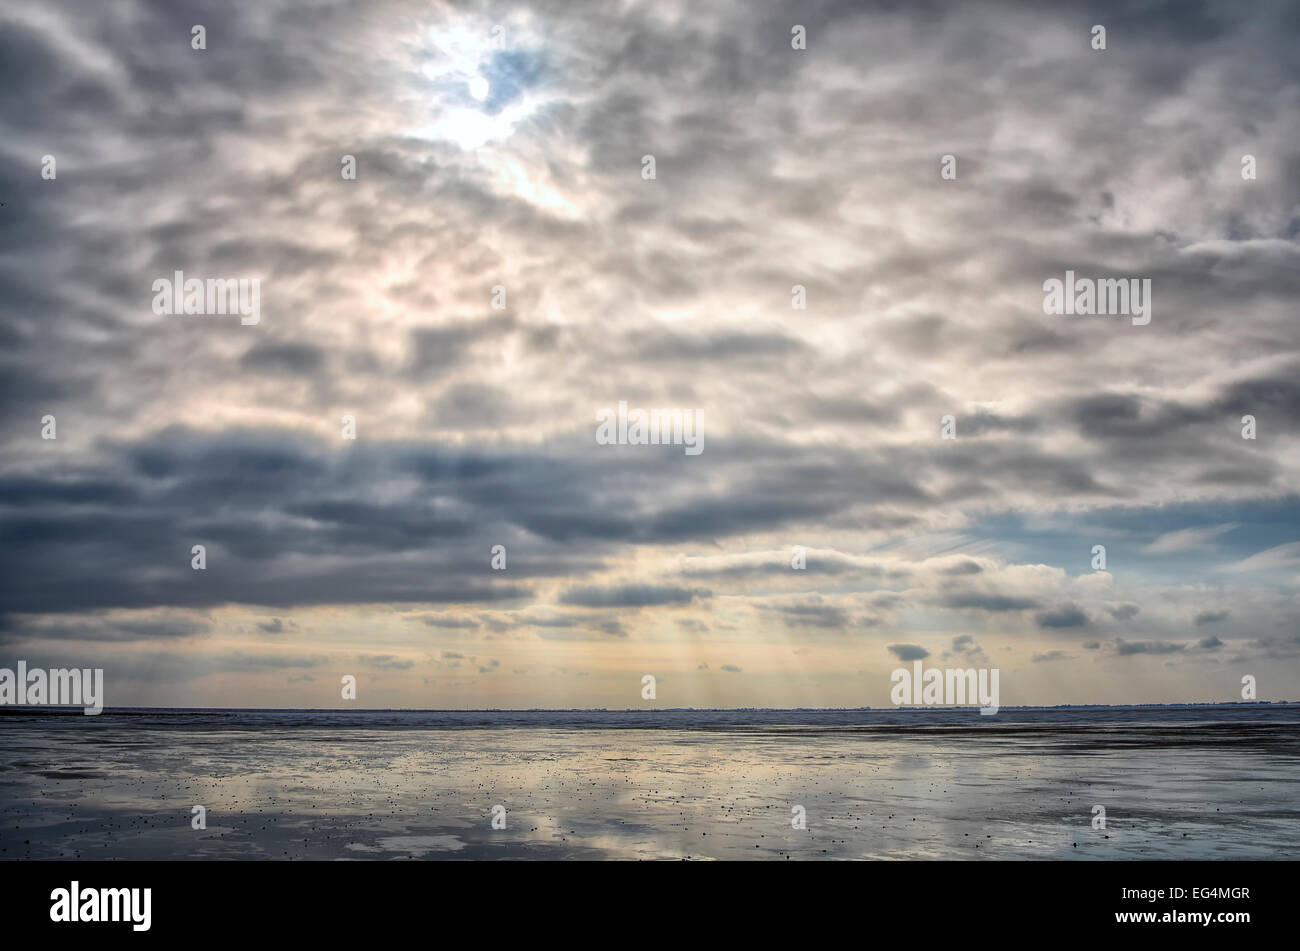 Clouds with sunshine on a winter's day at sea Stock Photo